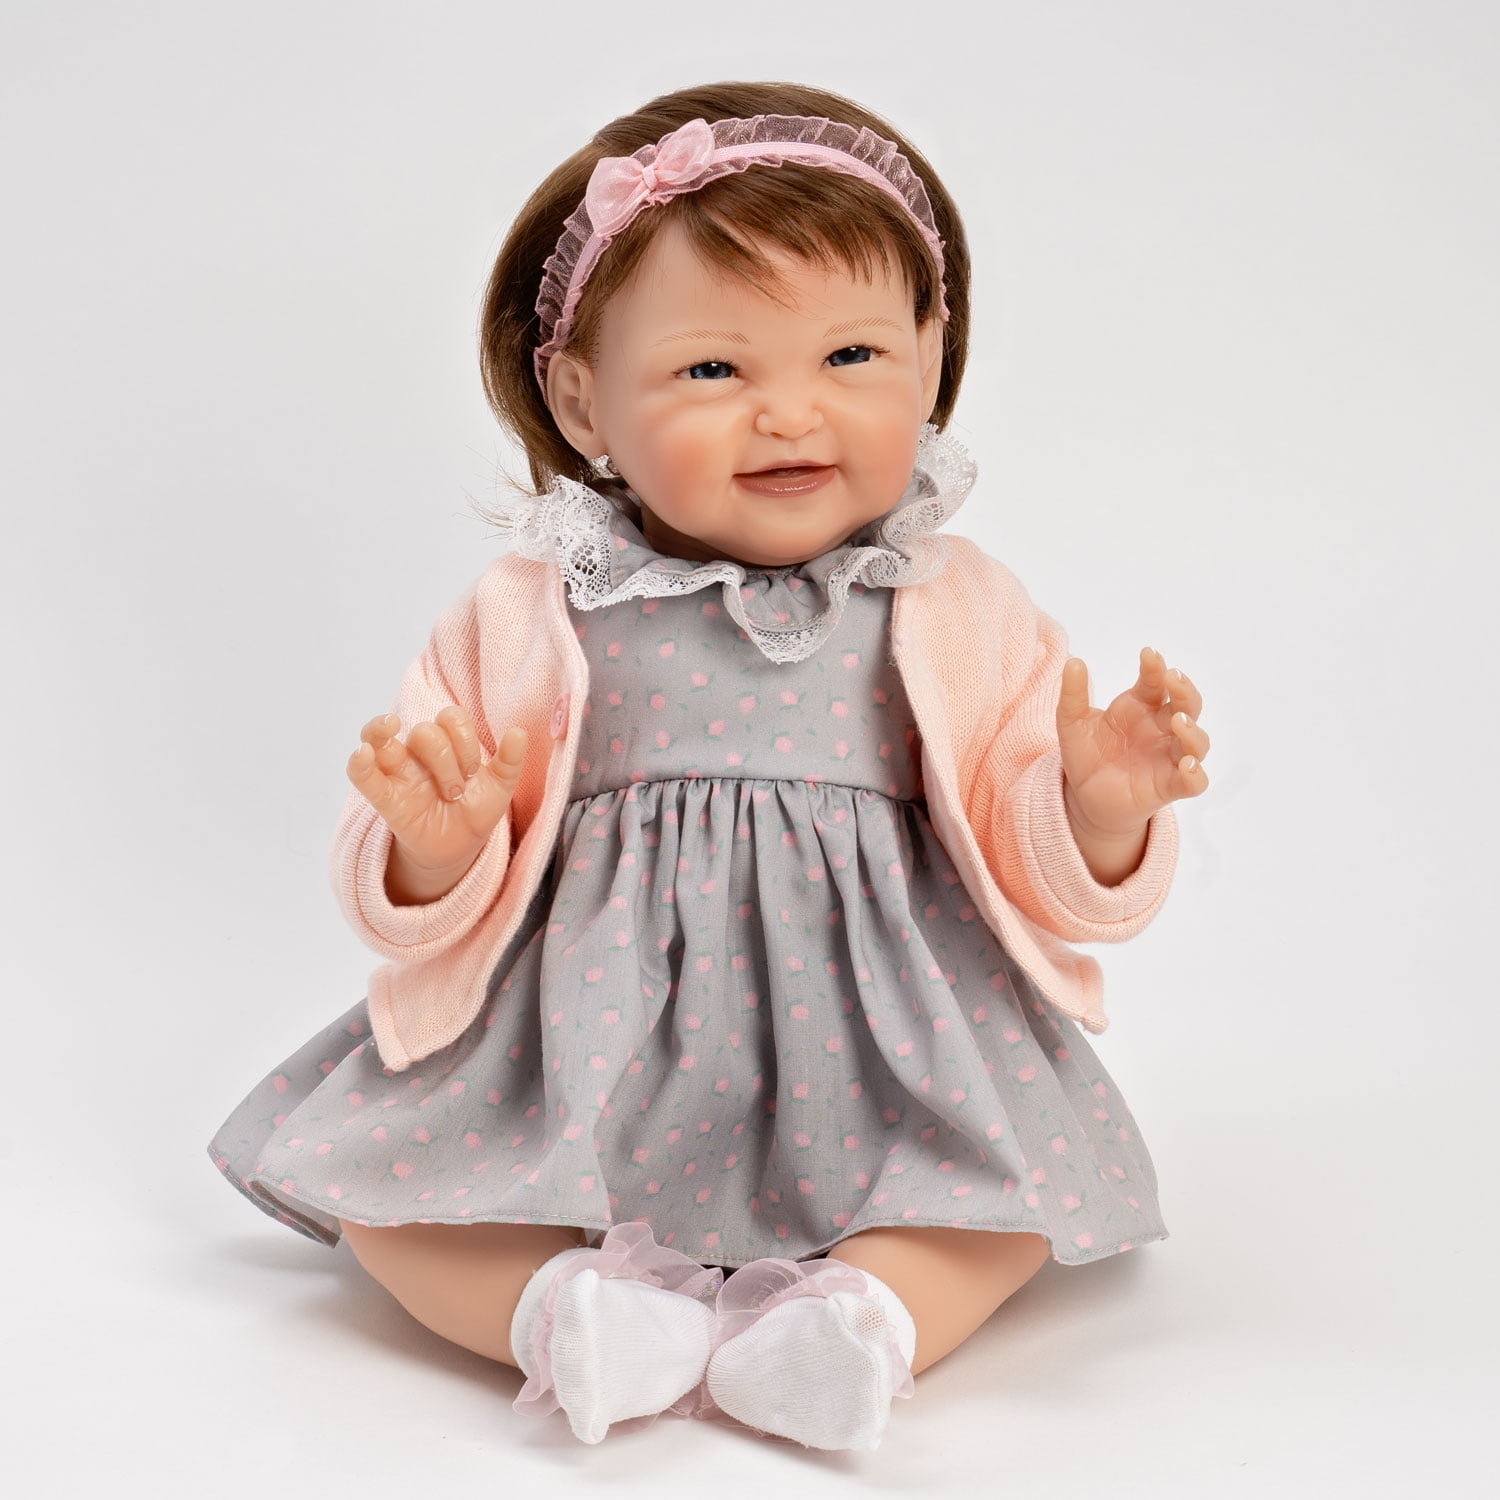 19 inches Paradise Galleries Reborn Toddler Baby Doll "Pumpkin Spice" 